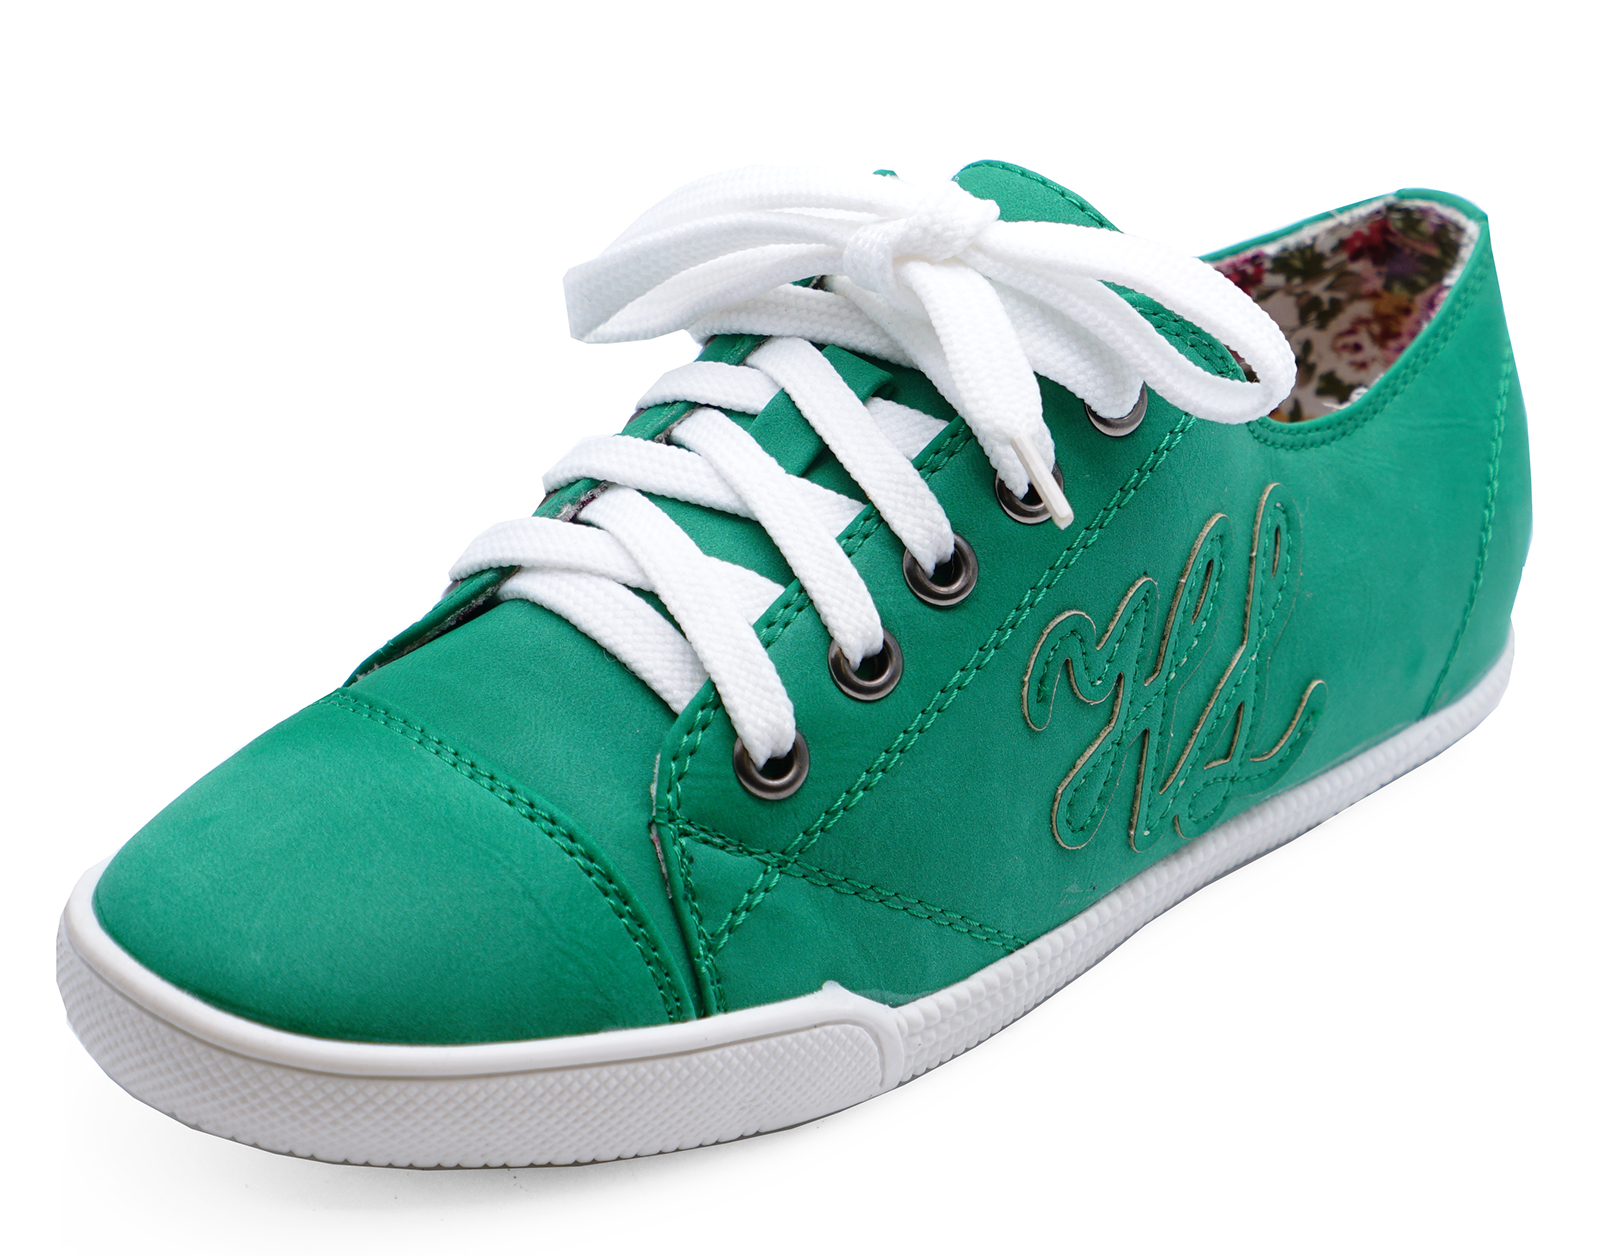 ladies green shoes